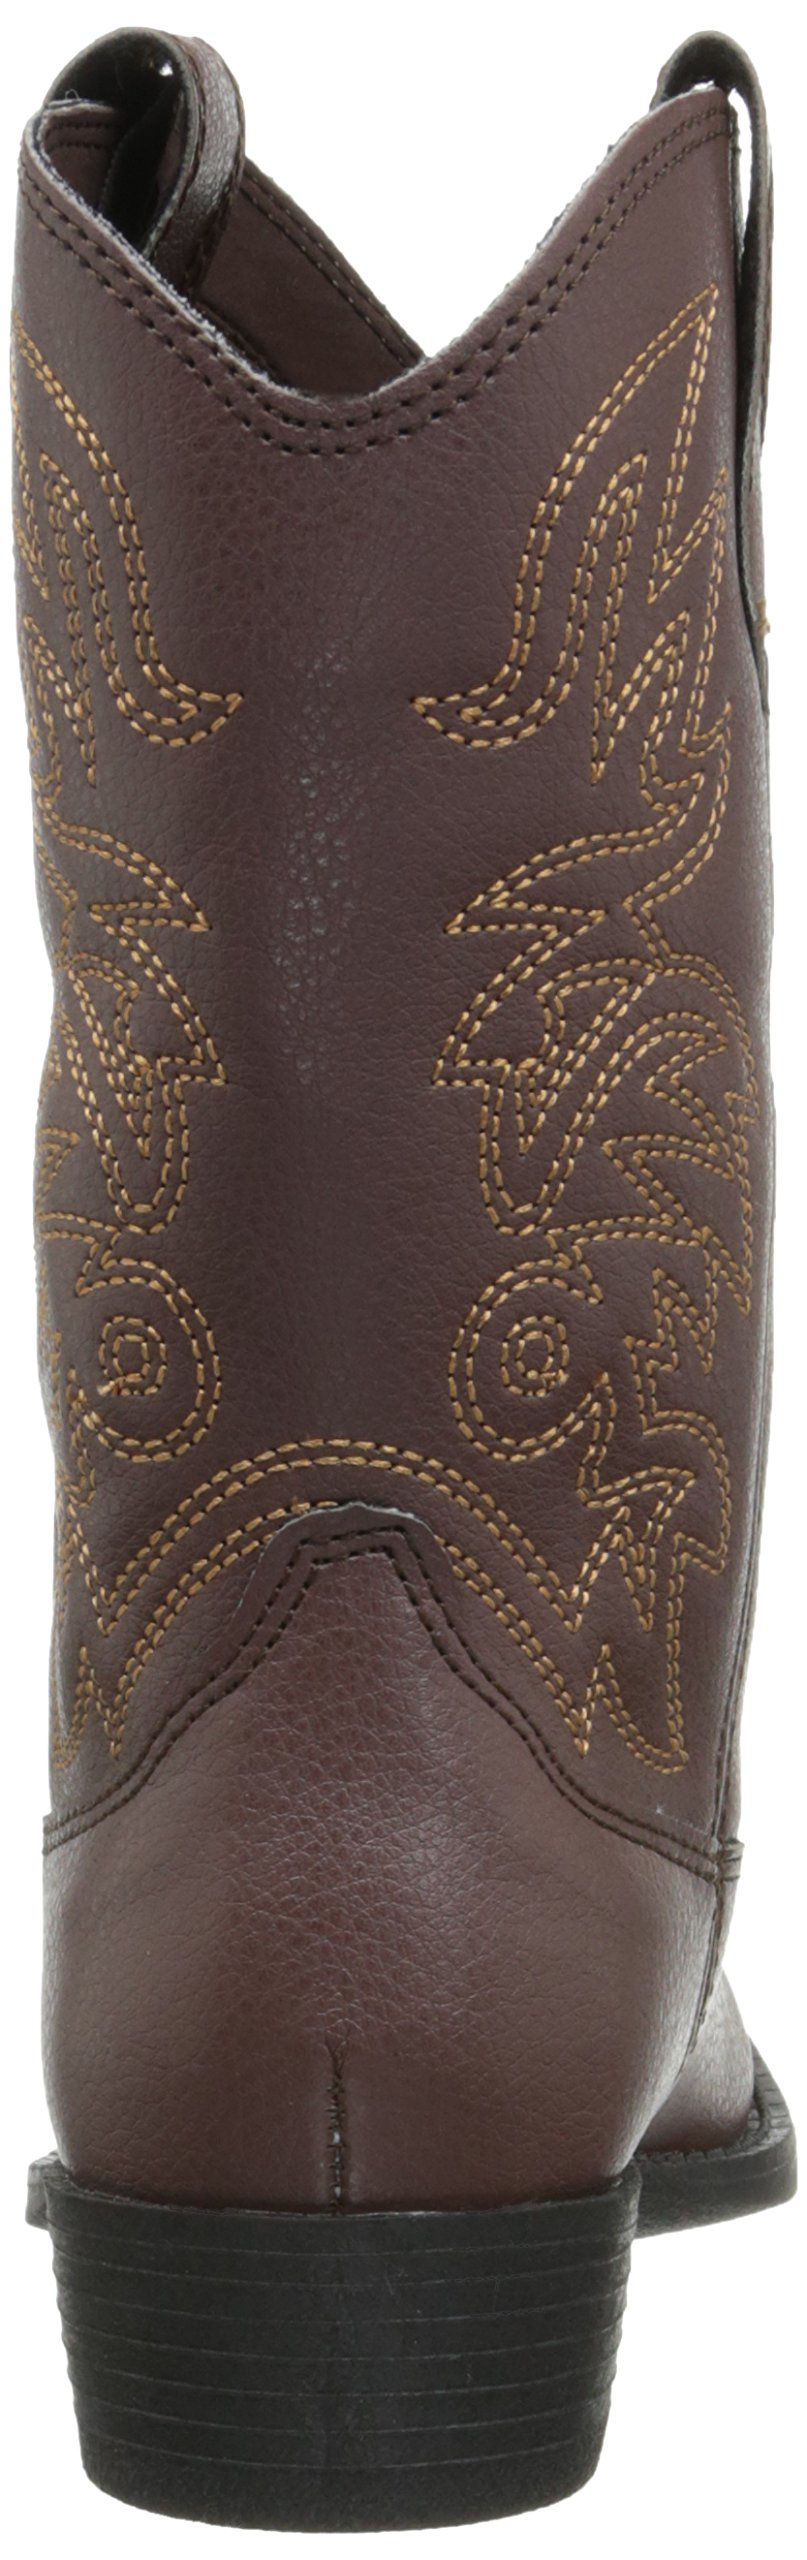 Deer Stags Unisex-Child Ranch-K Western Boot